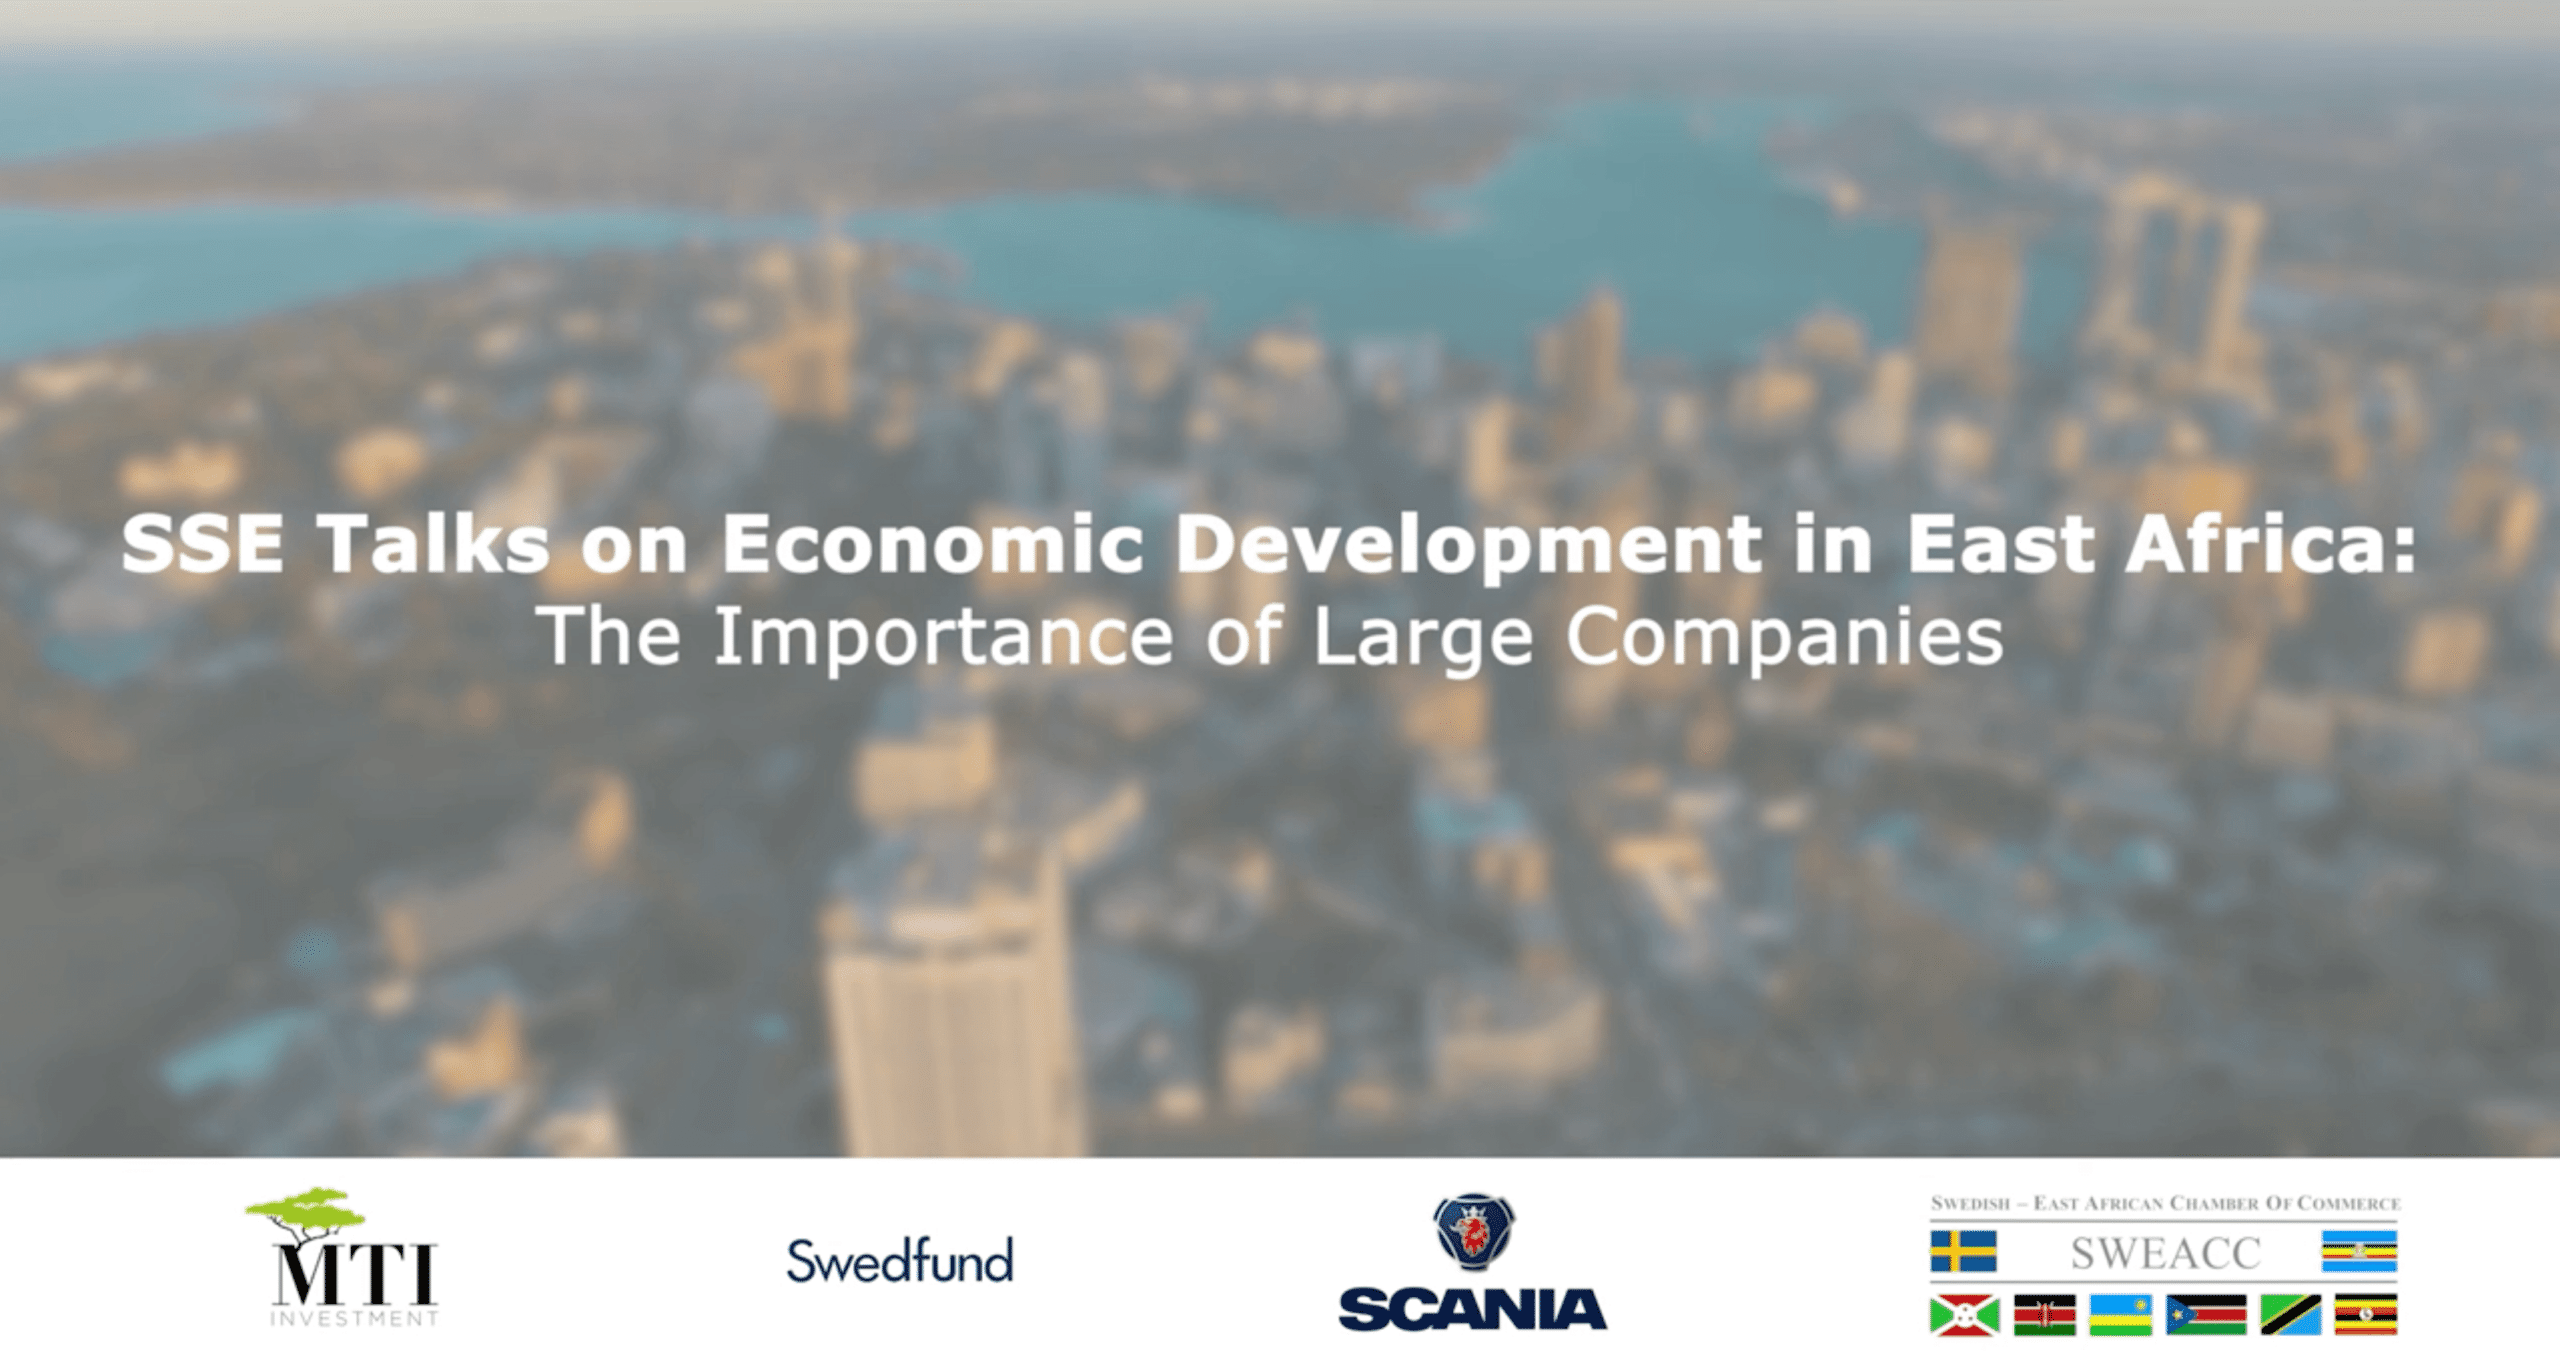 A screenshot of a presentation about the importance of Large companies in East Africa